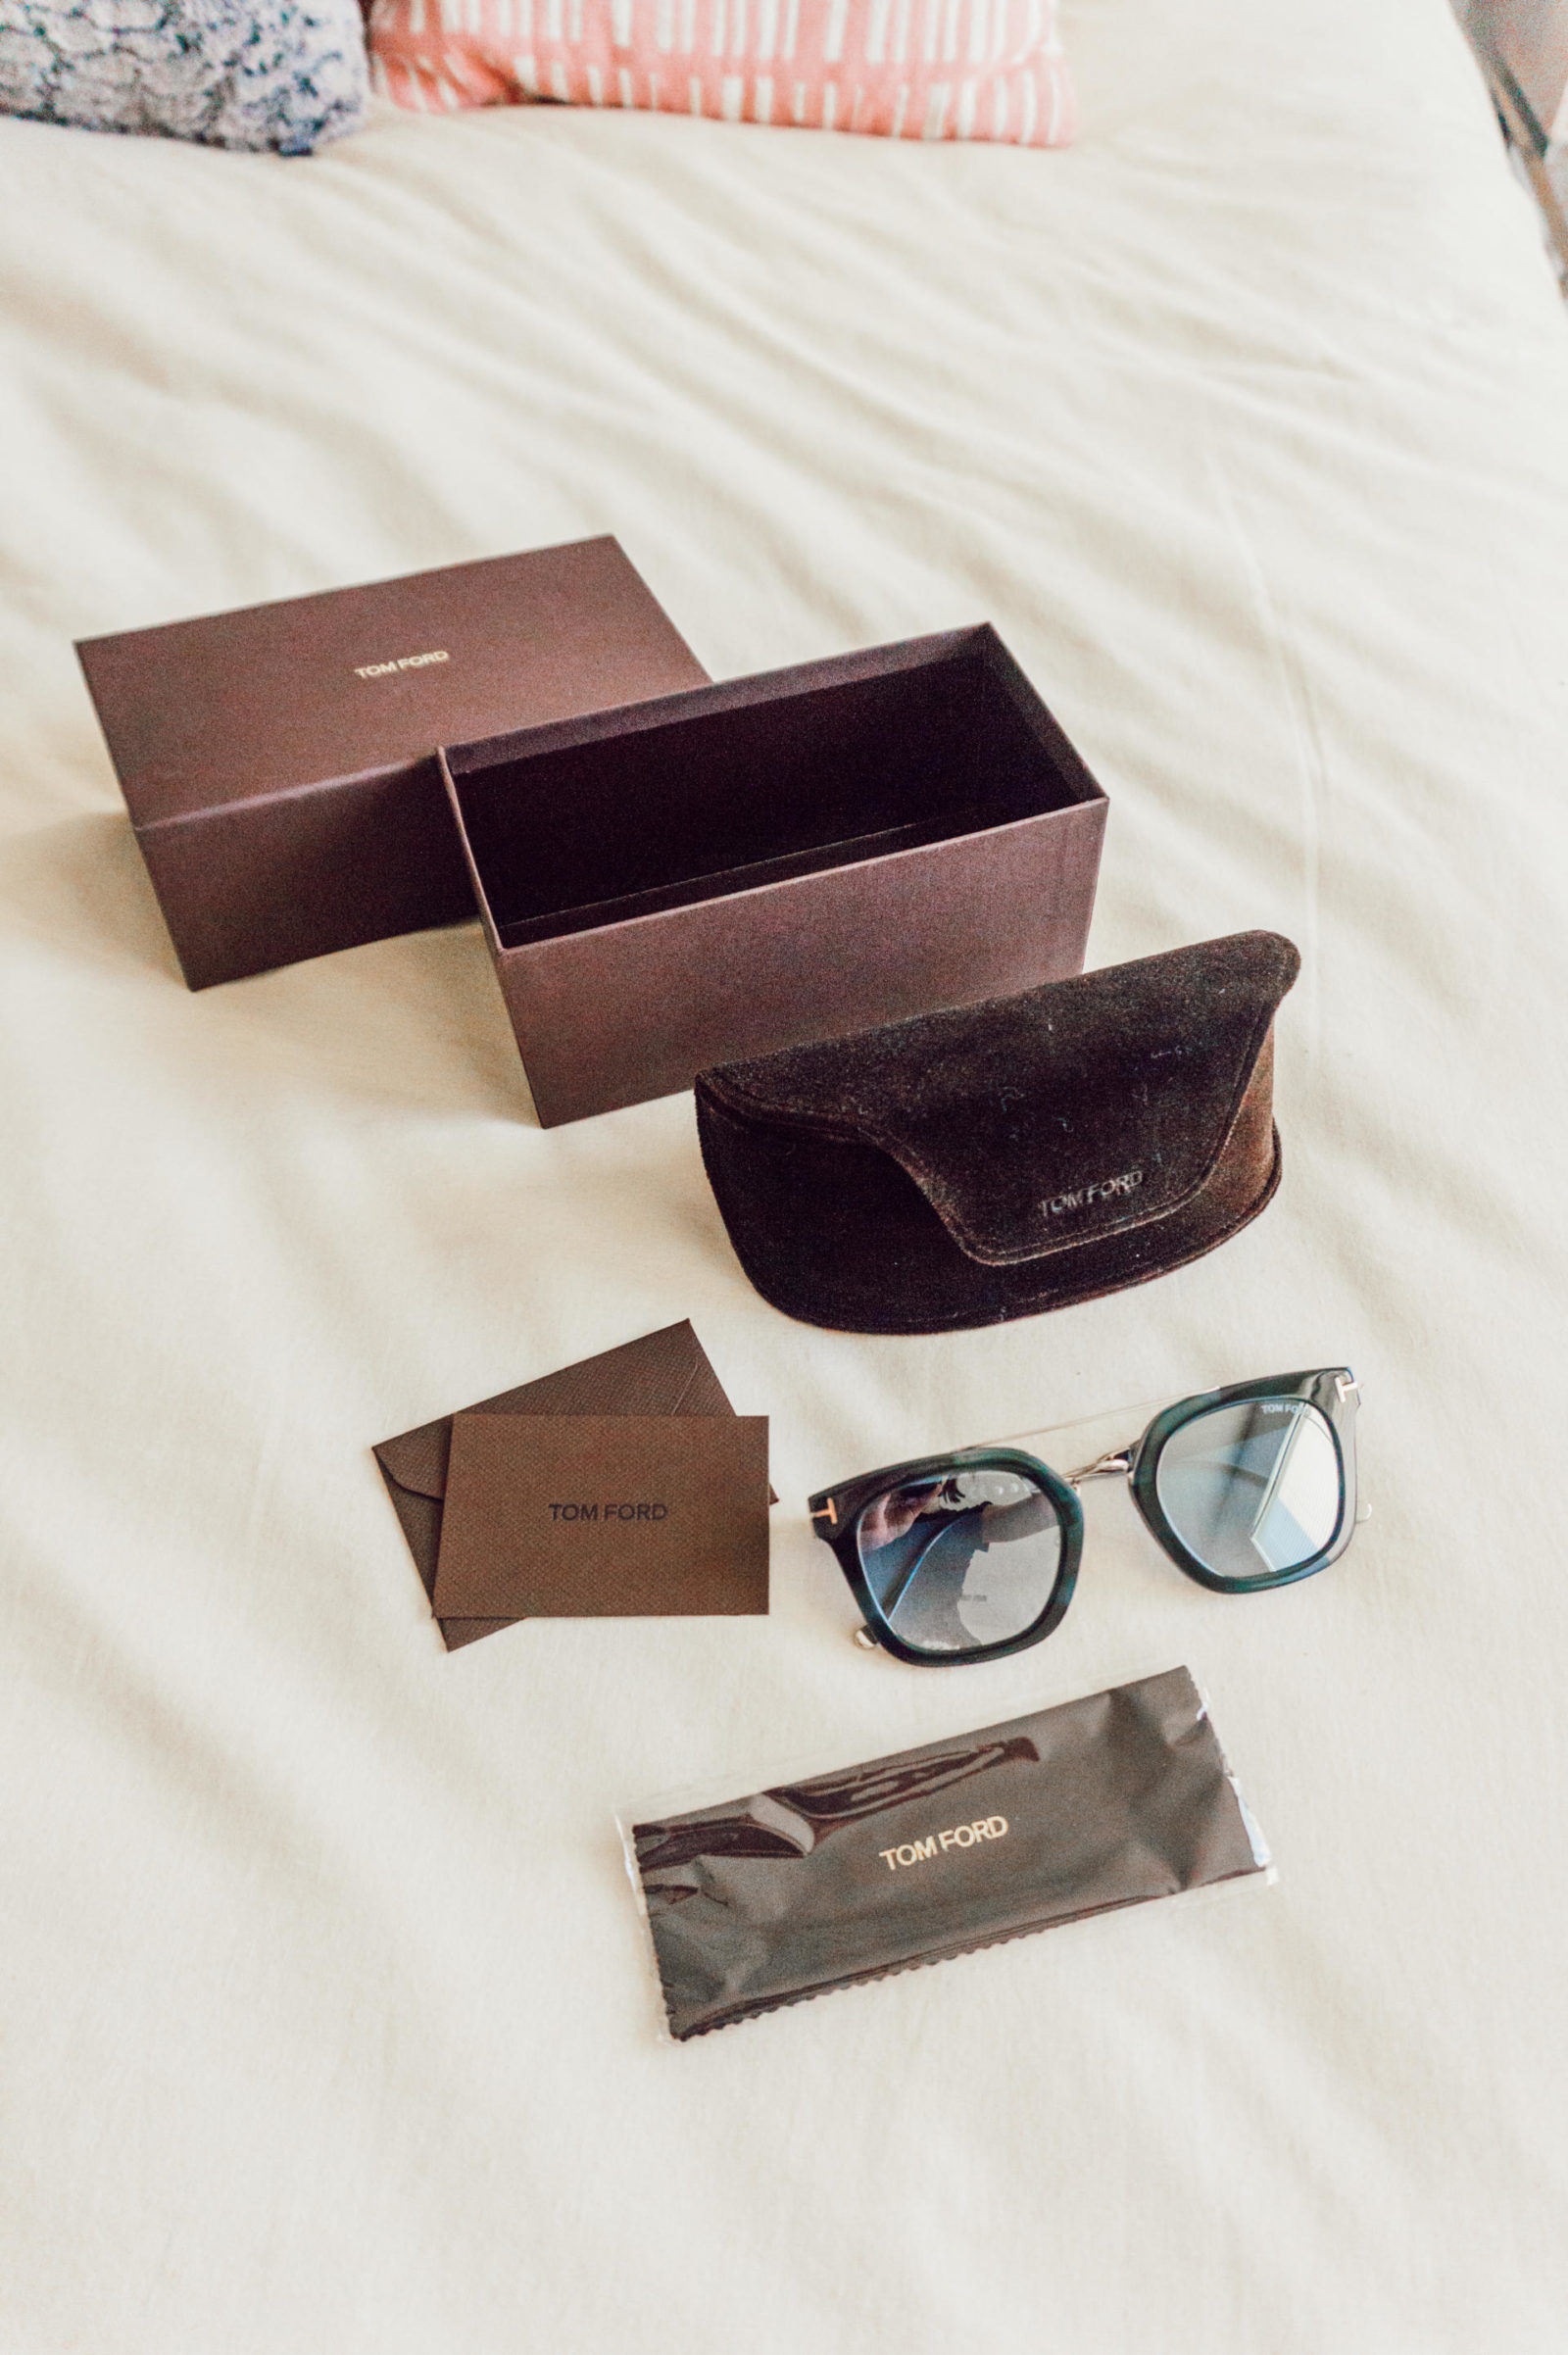 Review: Discounted Tom Ford Sunglasses from Smart Buy Glasses